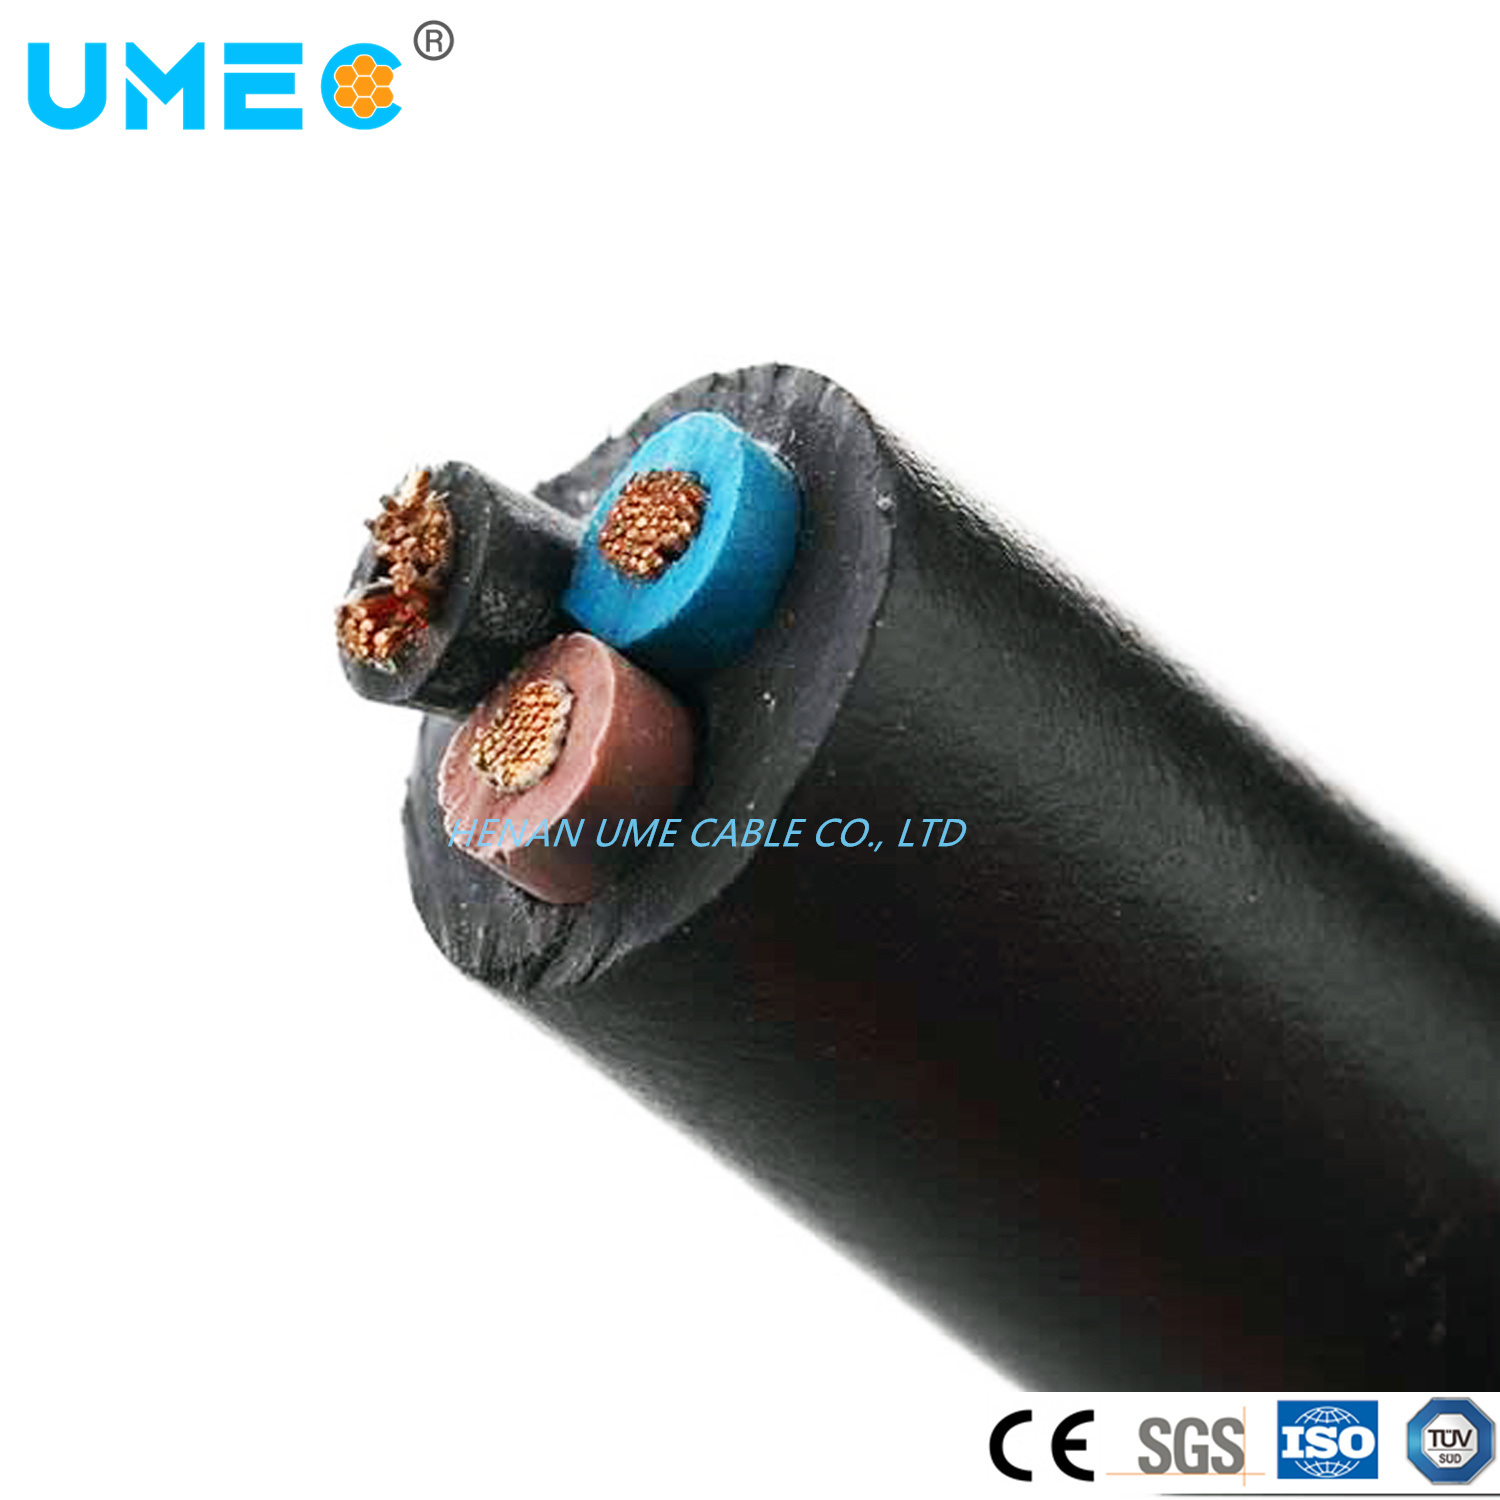 Wholesale Black H05rn-F H07rn-F H05rrf 2 3 4 5 6 Core 0.75mm2 1mm2 1.5mm2 2.5mm2 4mm2 6mm2 10mm2 16mm2 Flexible Rubber Insulated Cable